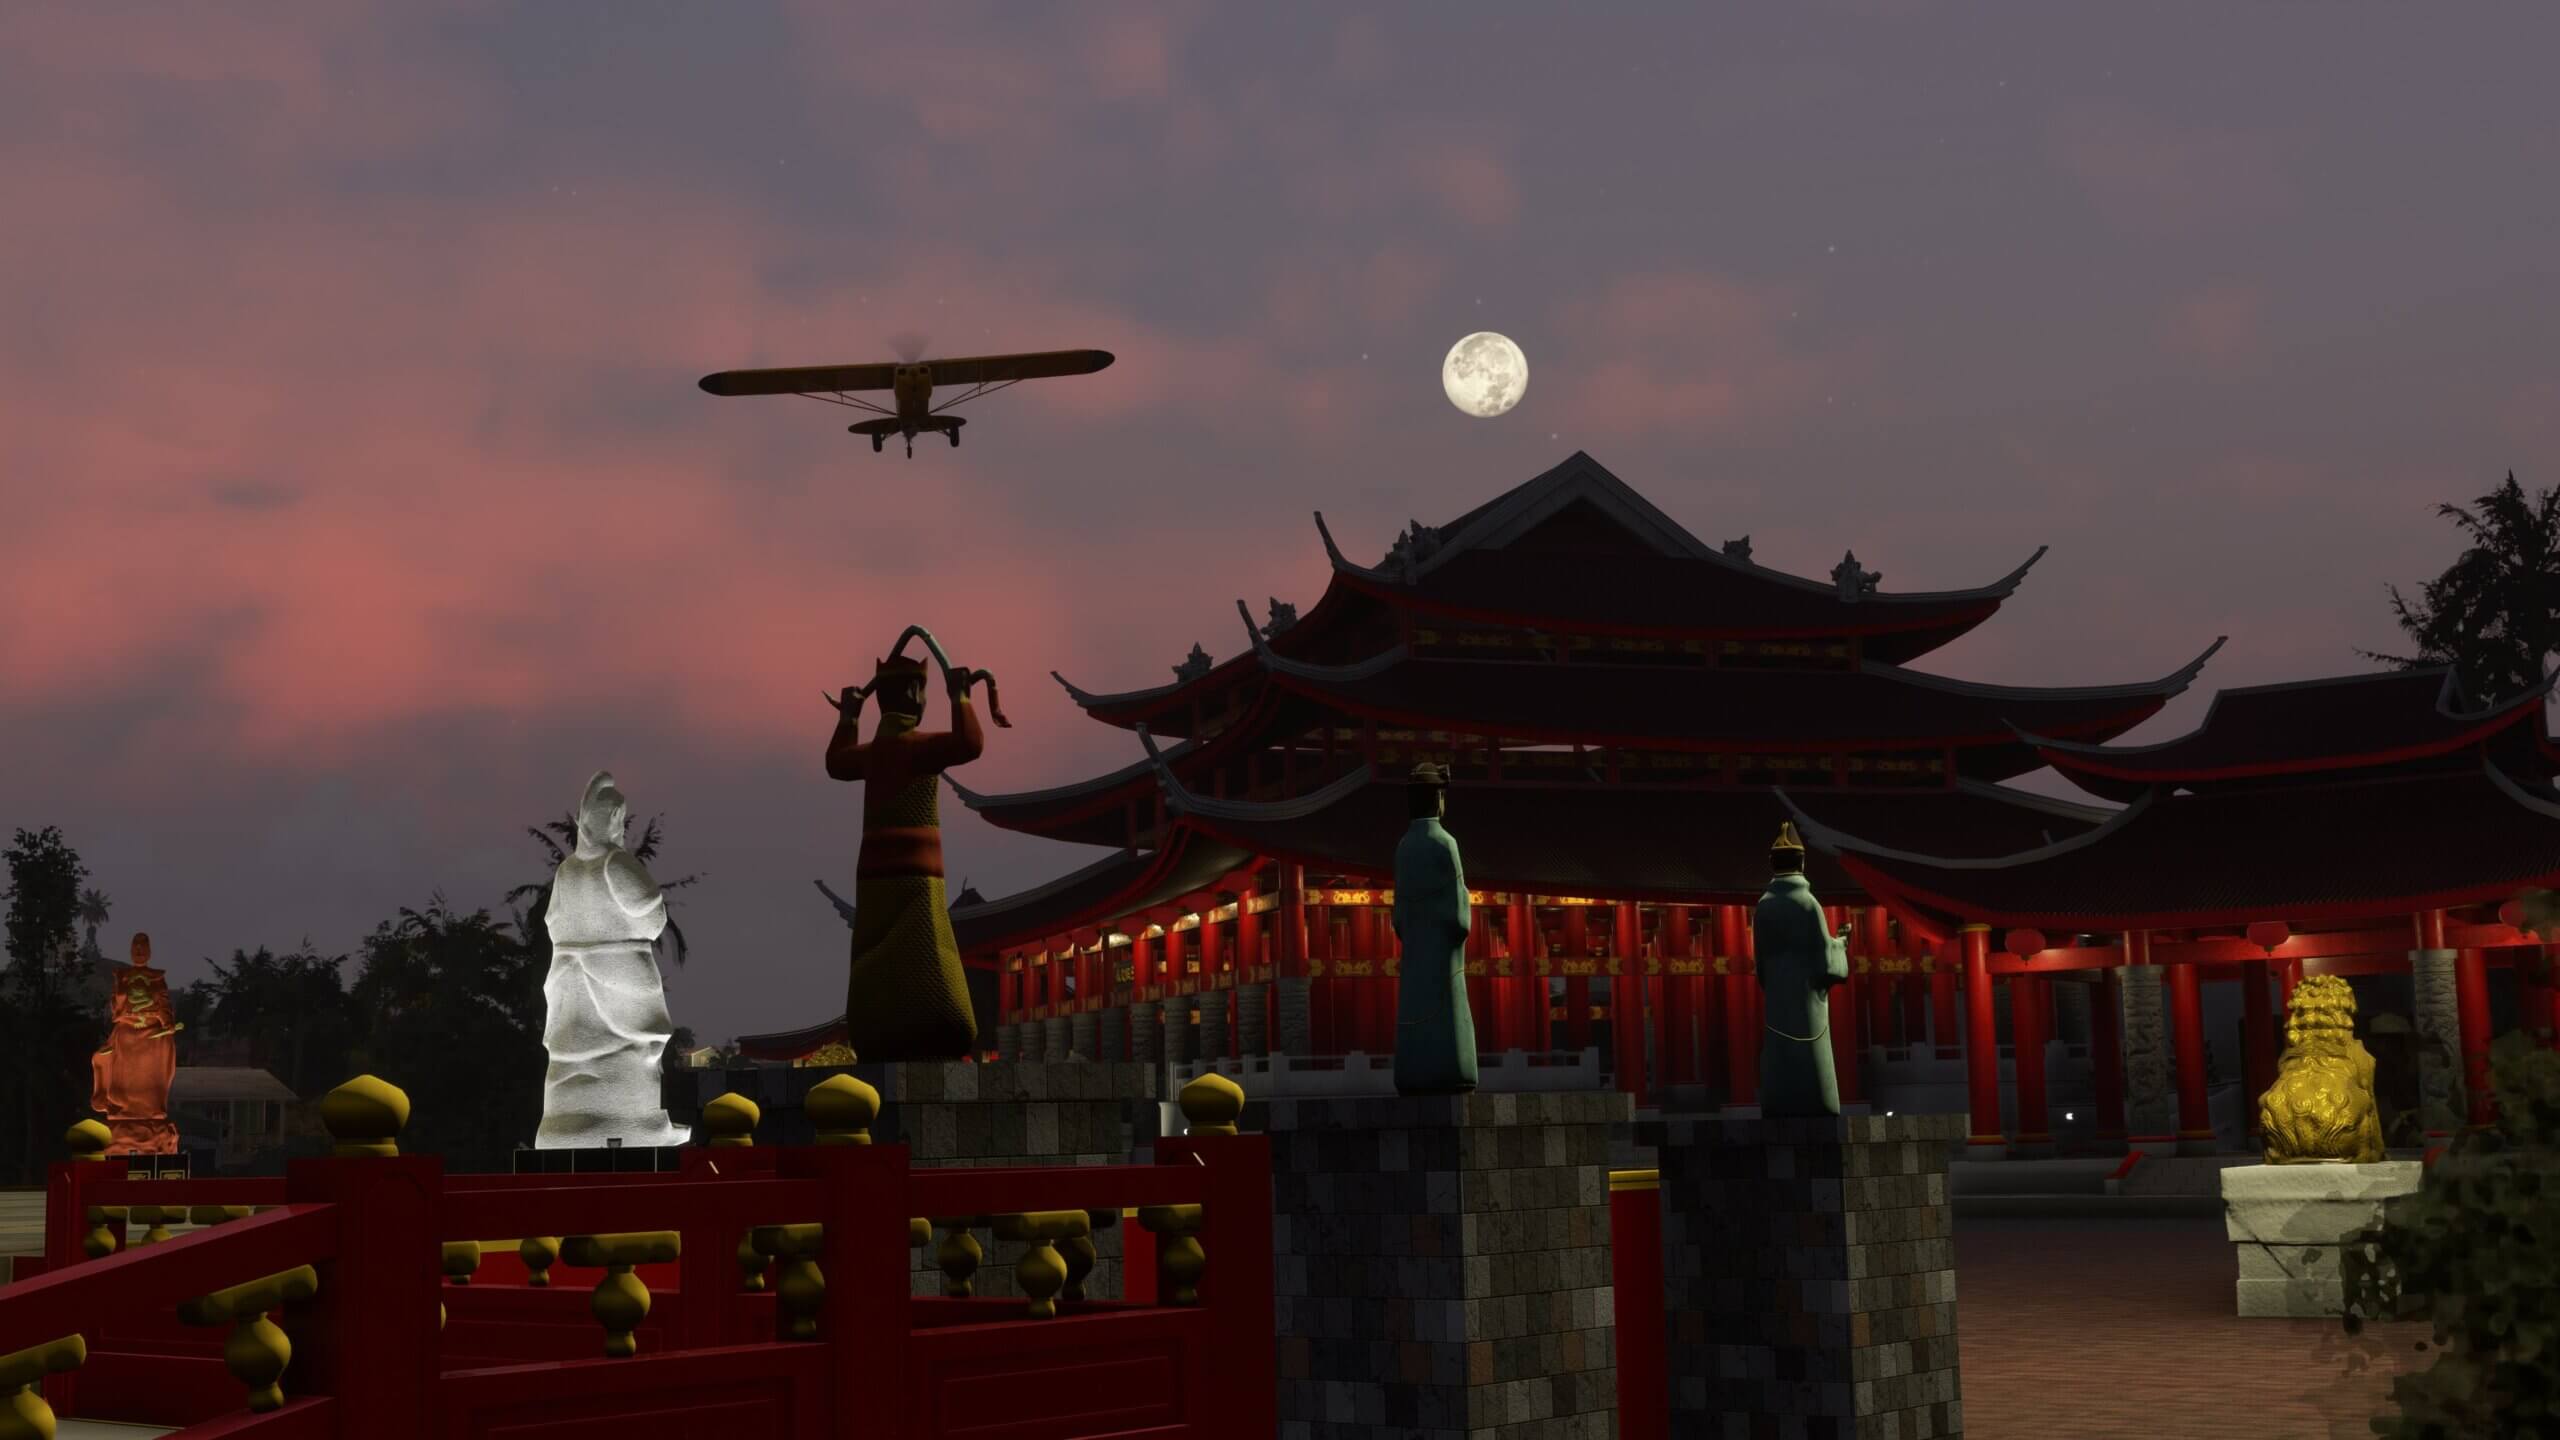 A general aviation aircraft flies above a Chinese temple, with the moon casting light from above.